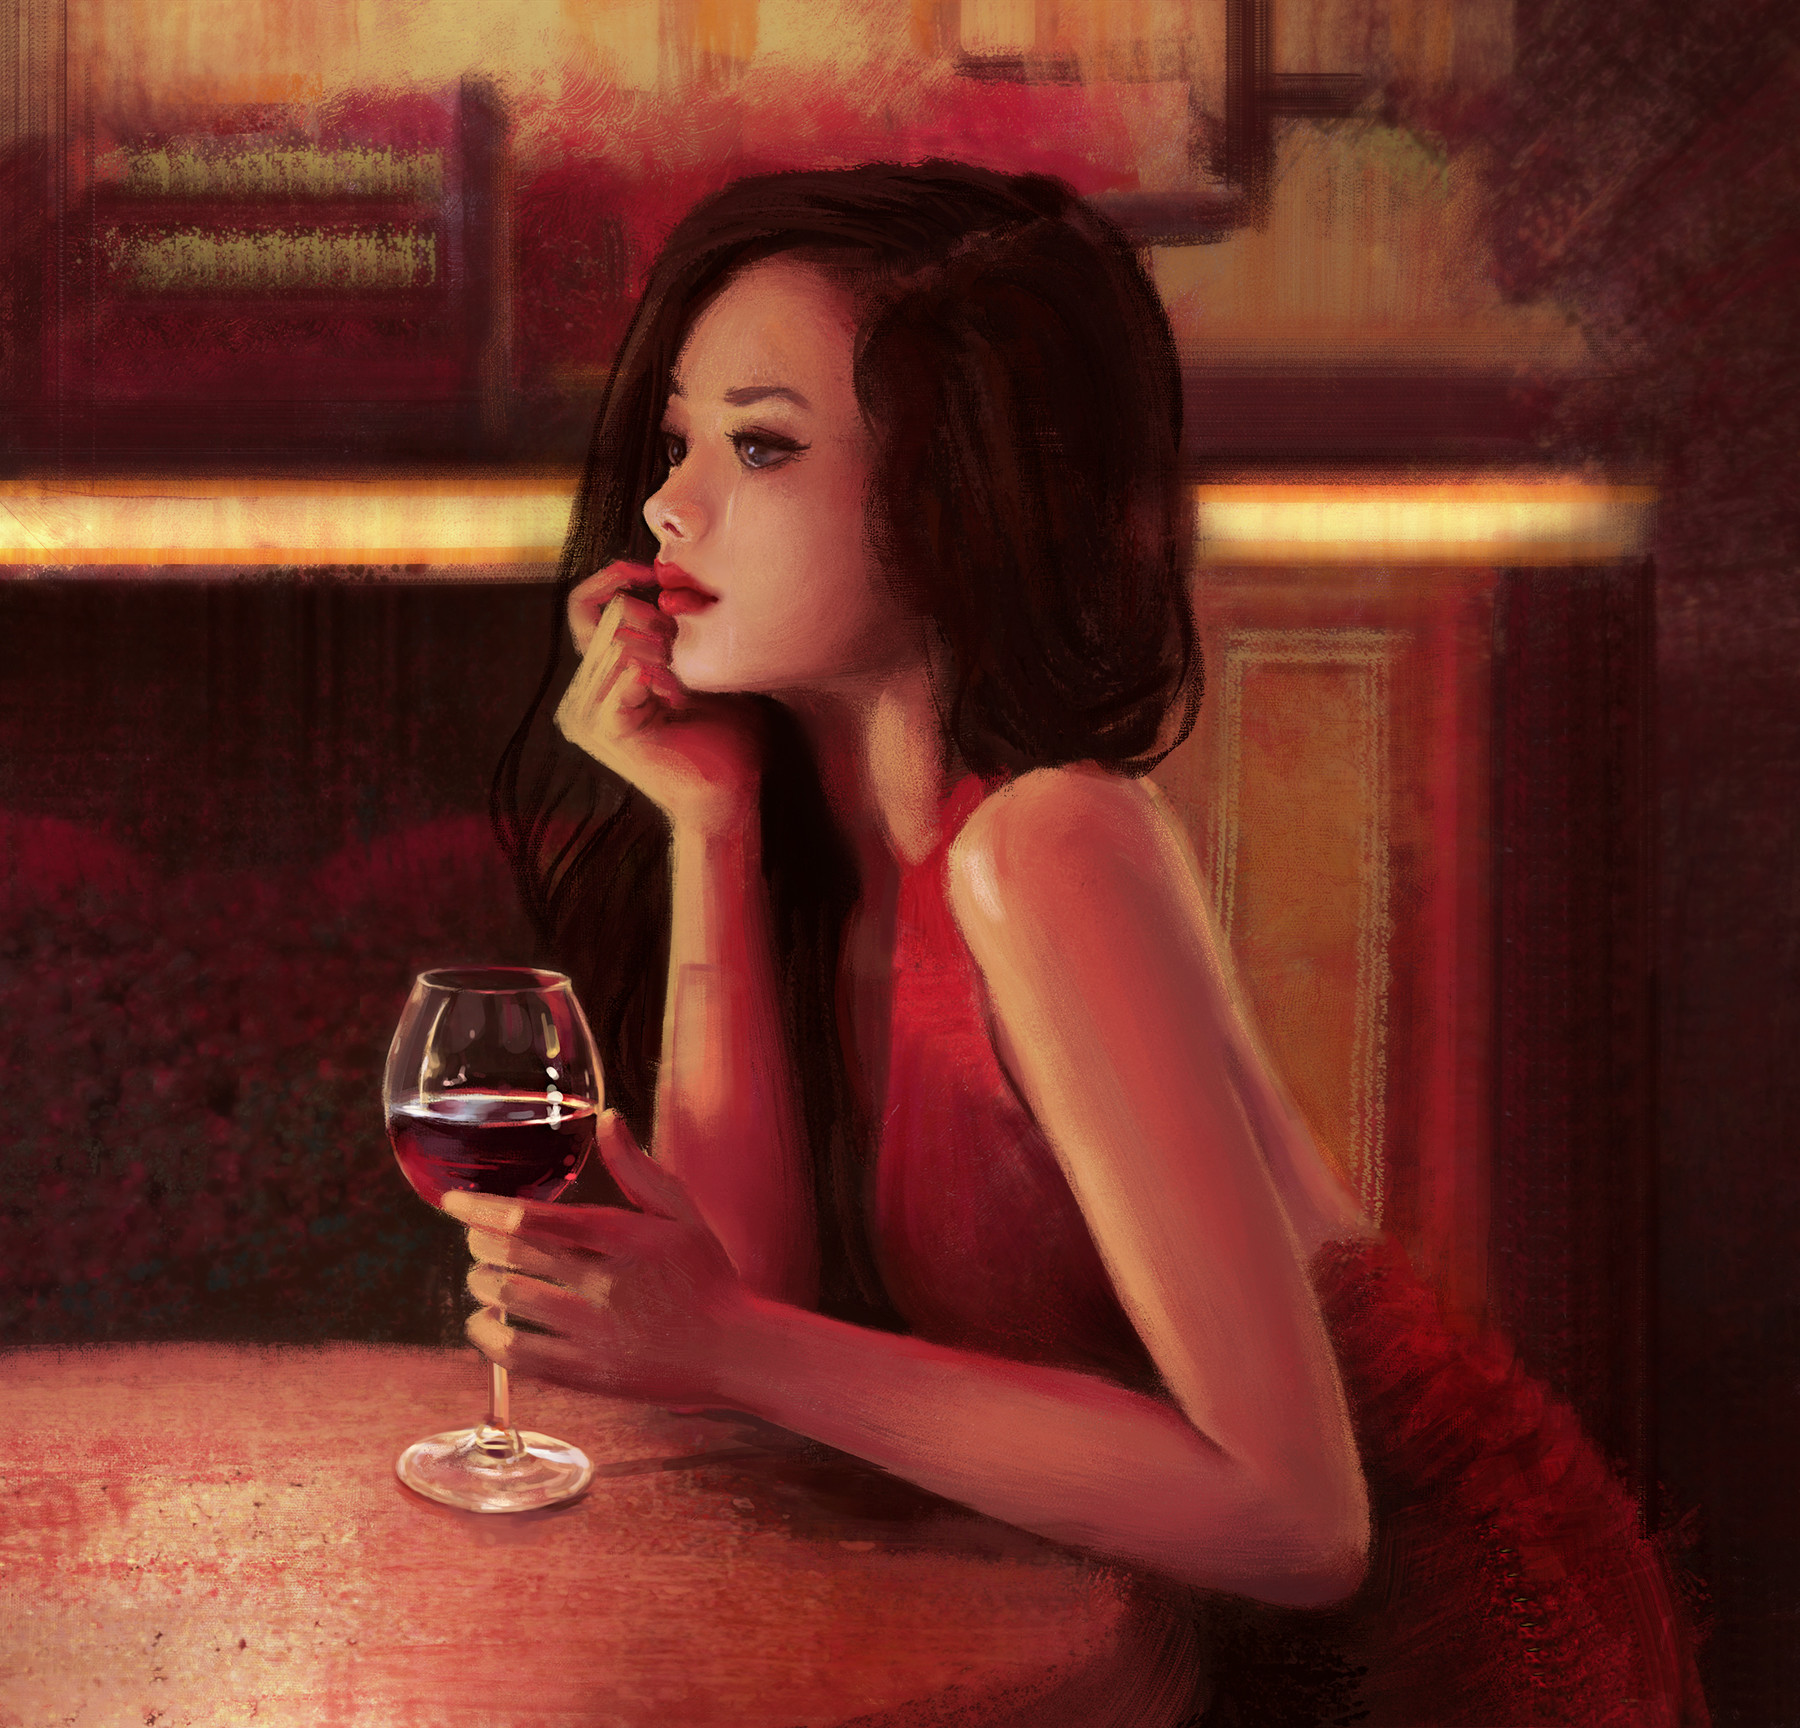 General 1800x1728 Mandy Jurgens red wine wine glass wine crying fan art red clothing red dress dark hair digital painting looking into the distance hand on face digital art women artwork woman crying ArtStation